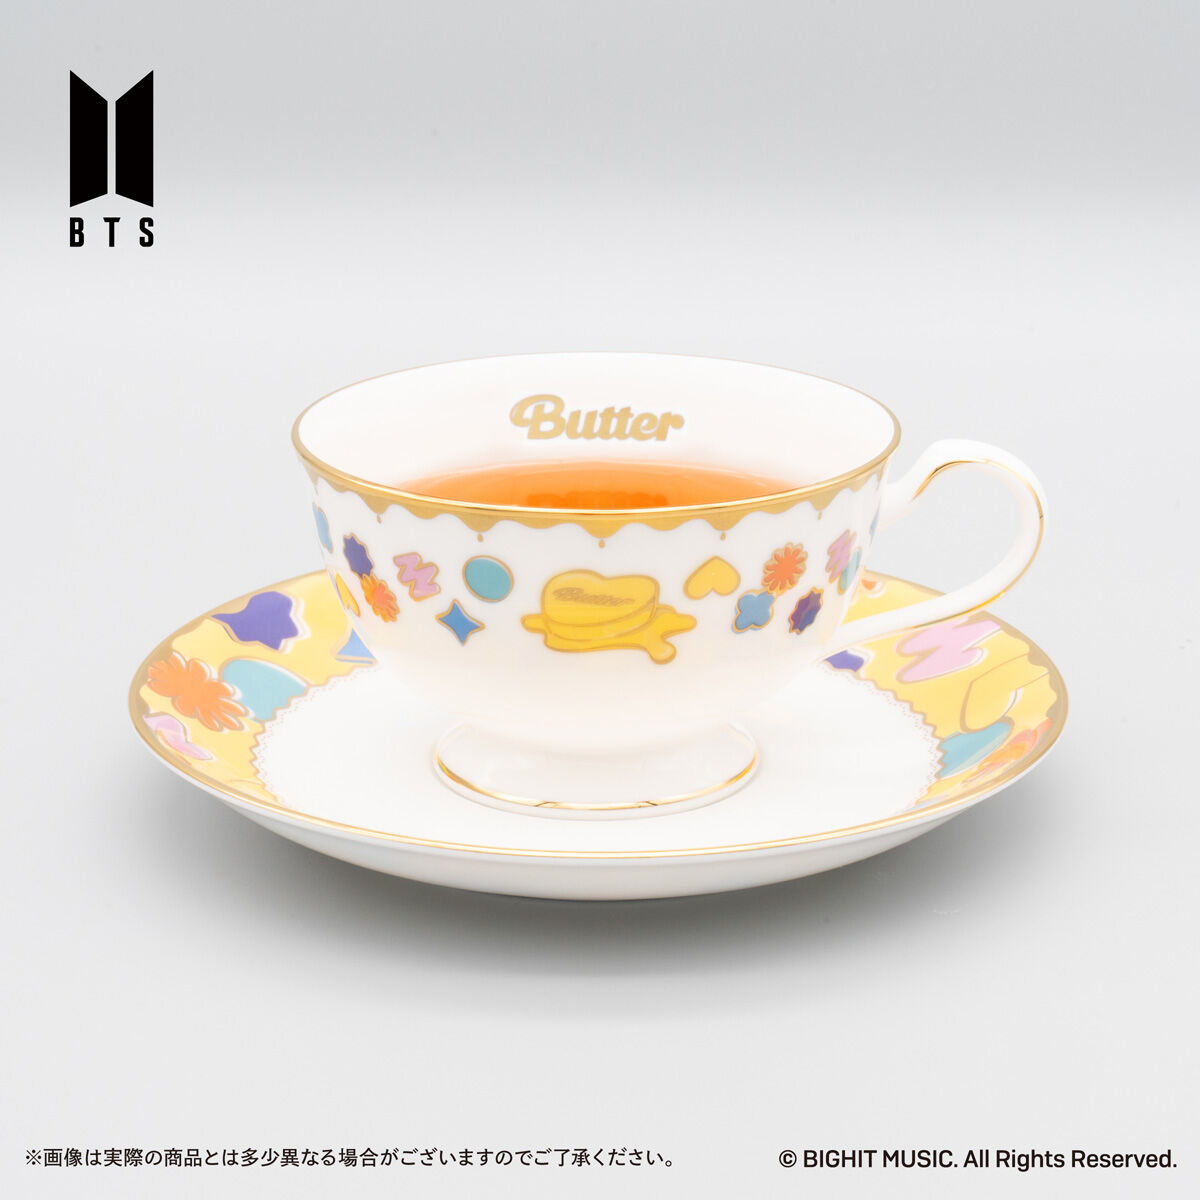 Noritake Cup＆Saucer set BTS Music Theme Boy With Luv ver